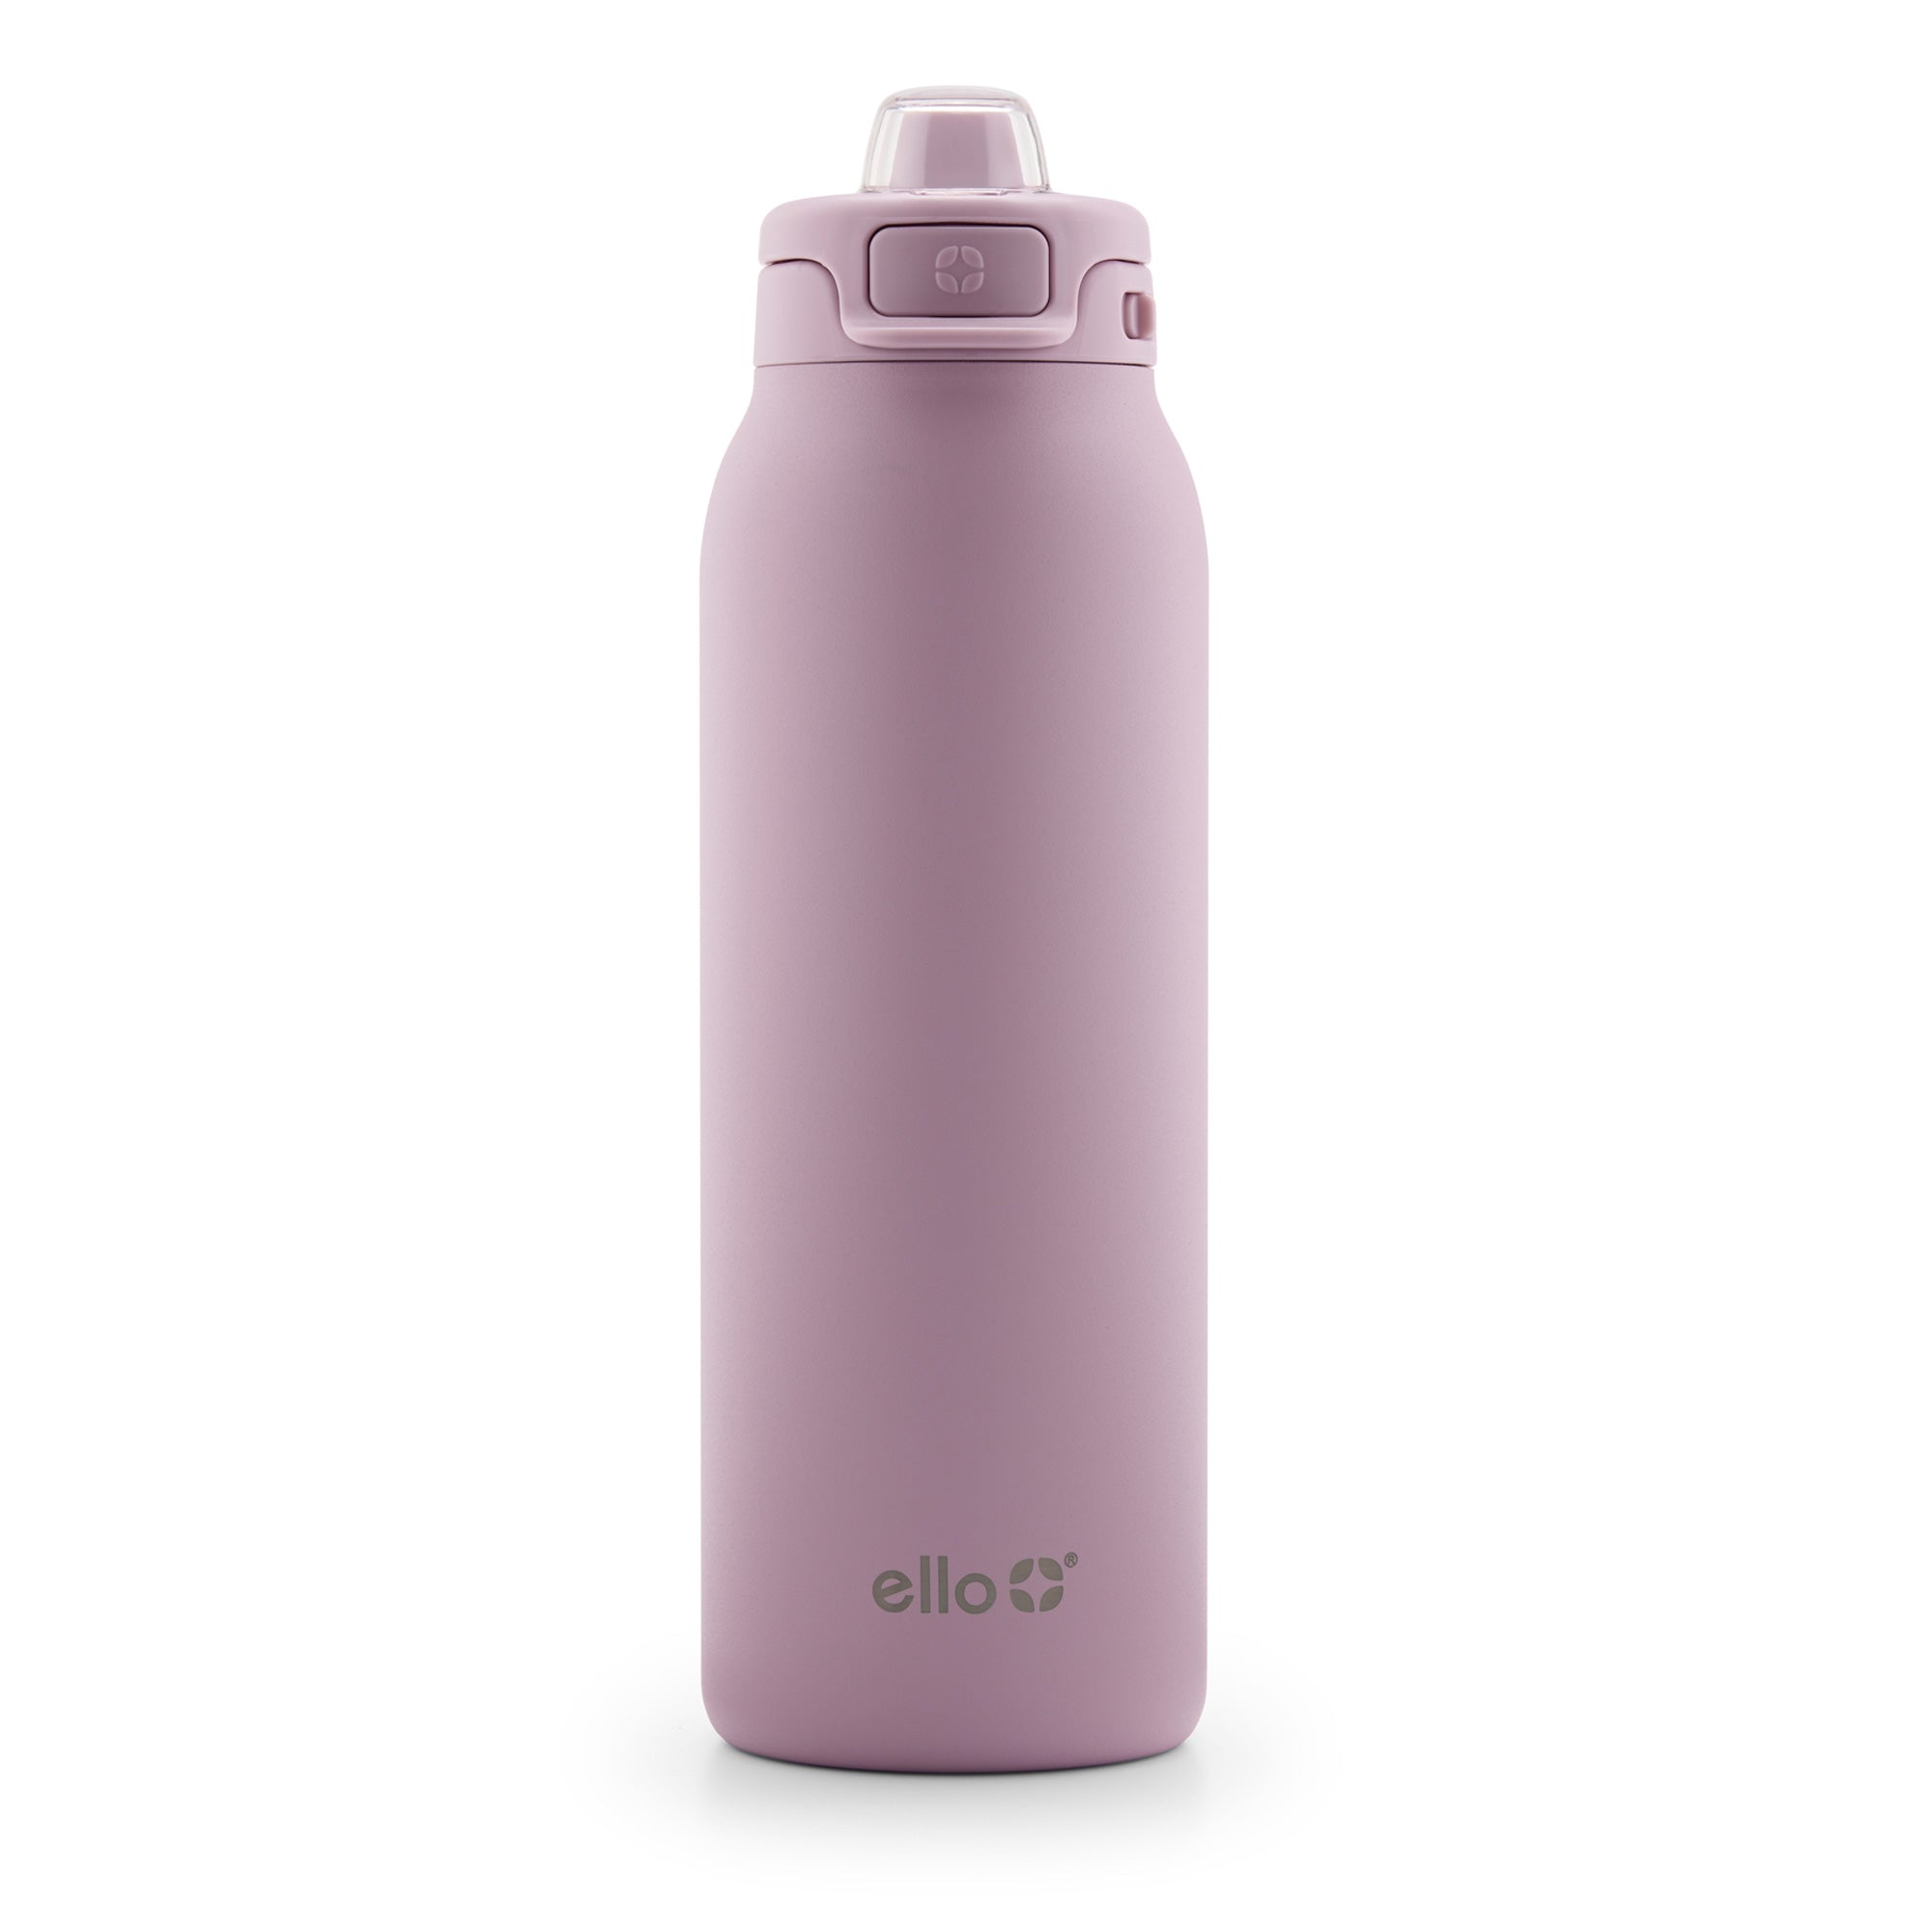 Ello Cooper Yucca 22oz Vacuum Insulated Stainless Steel Water Bottle